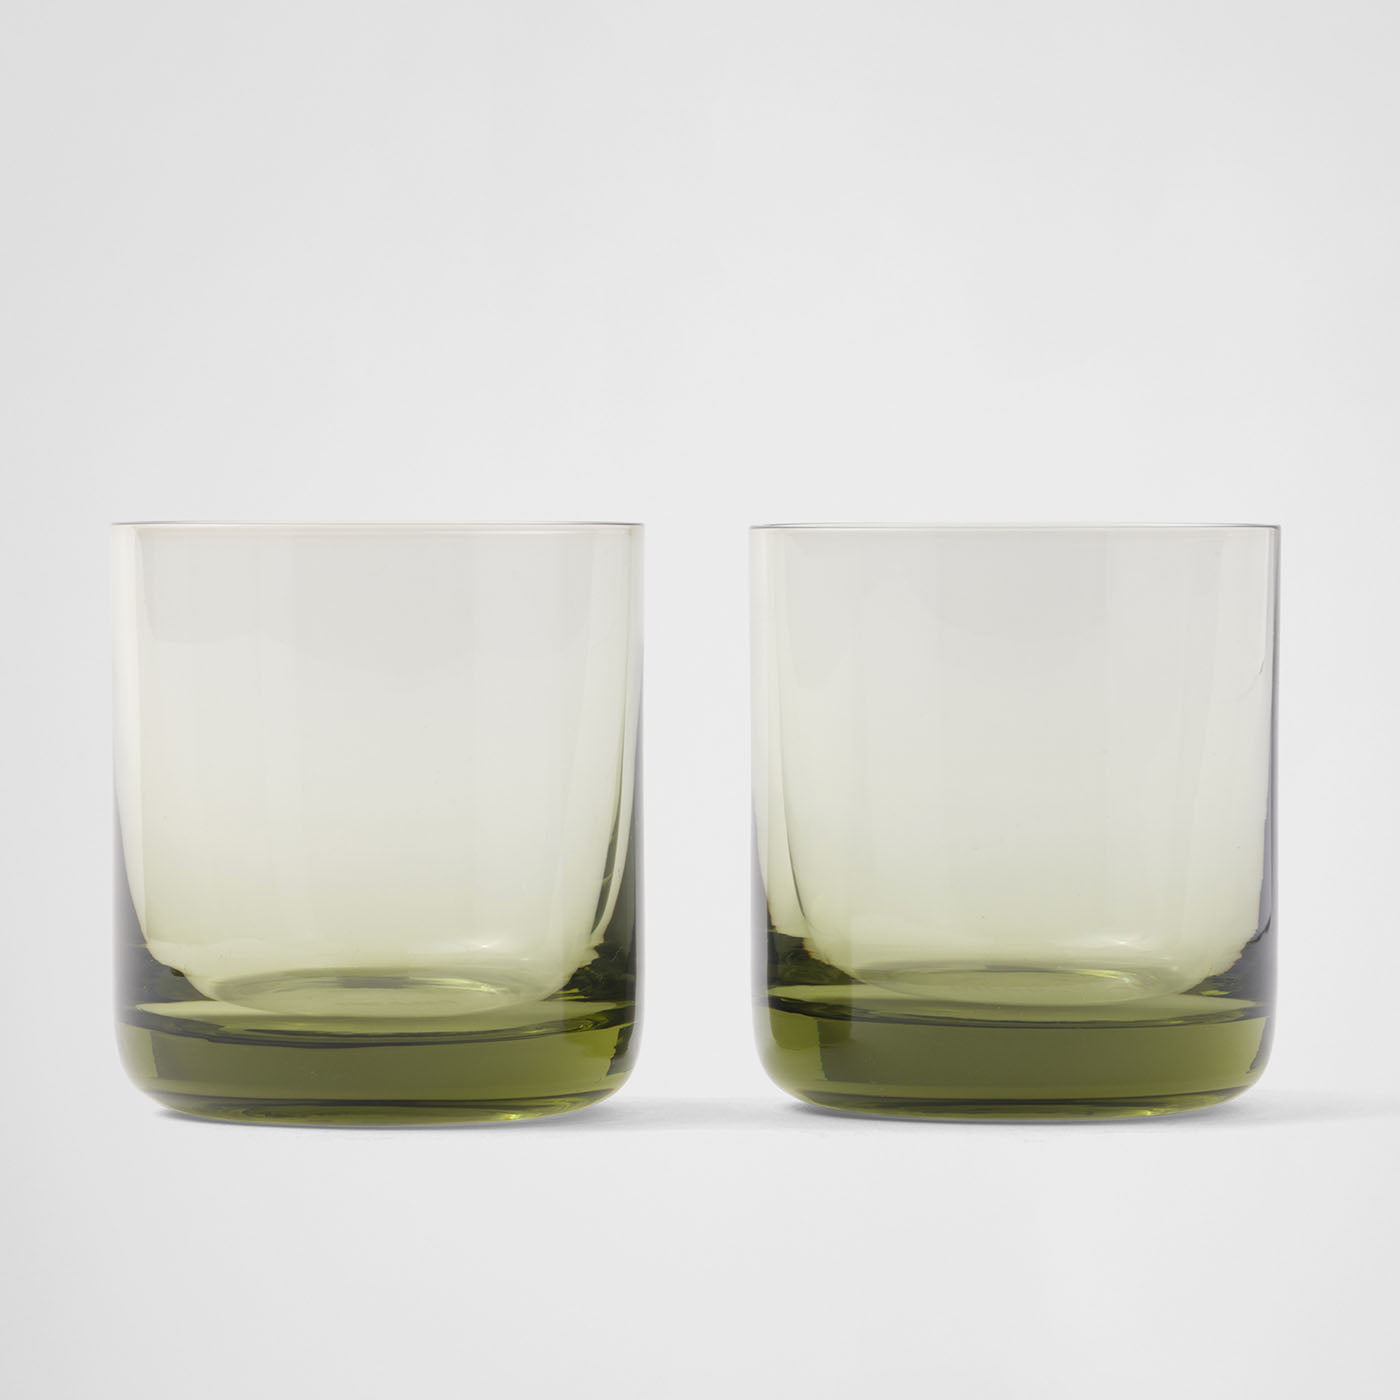 Plinth Set of two Moss Crystal Tumbler Glasses - Alternative view 1